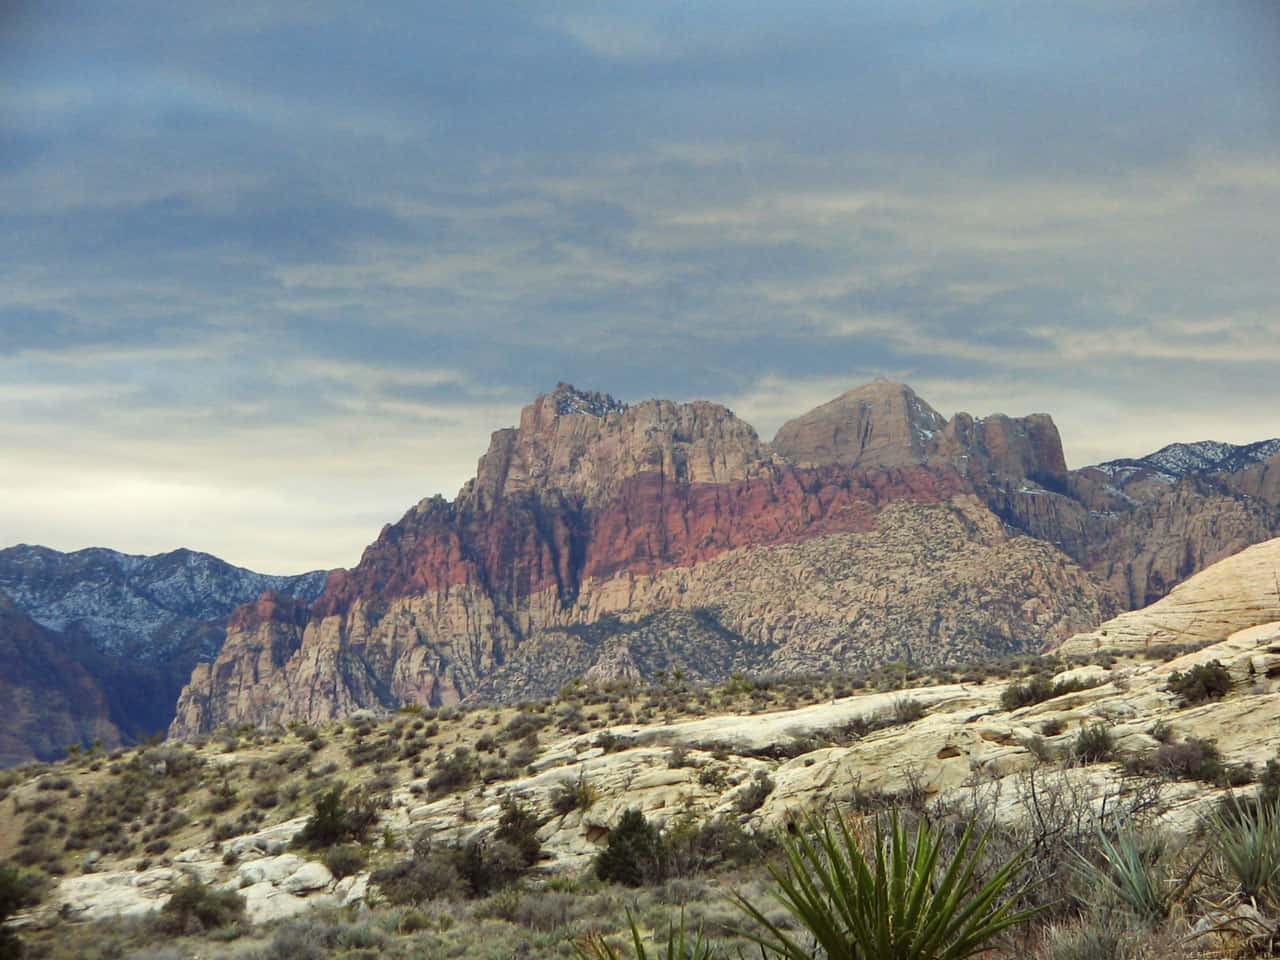 Fun facts about Nevada: It has the most mountain ranges.